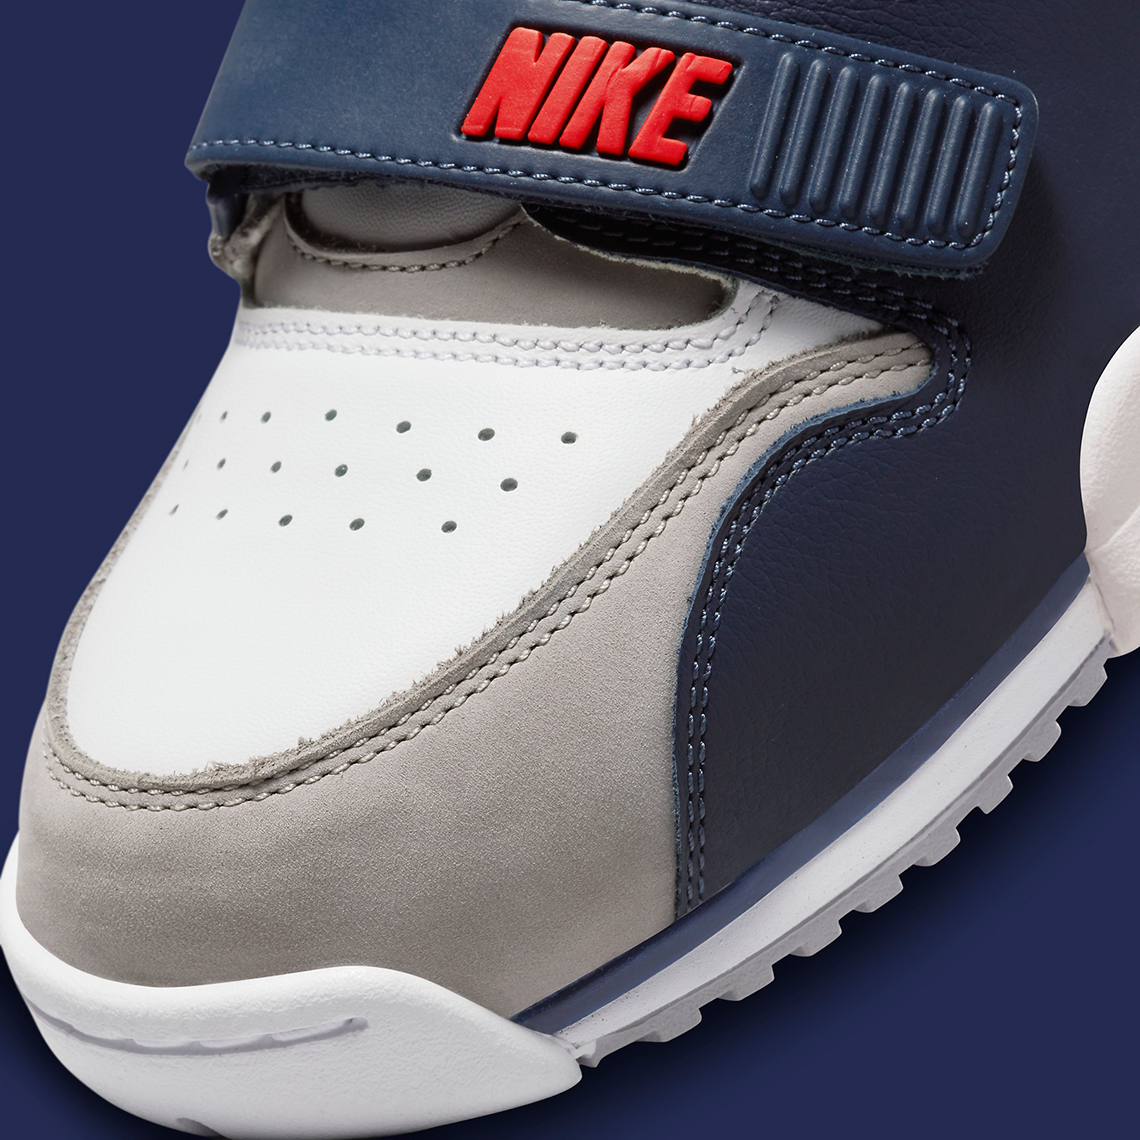 nike air max silver shoes online india price list White Grey Navy Red Dm0521 101 2